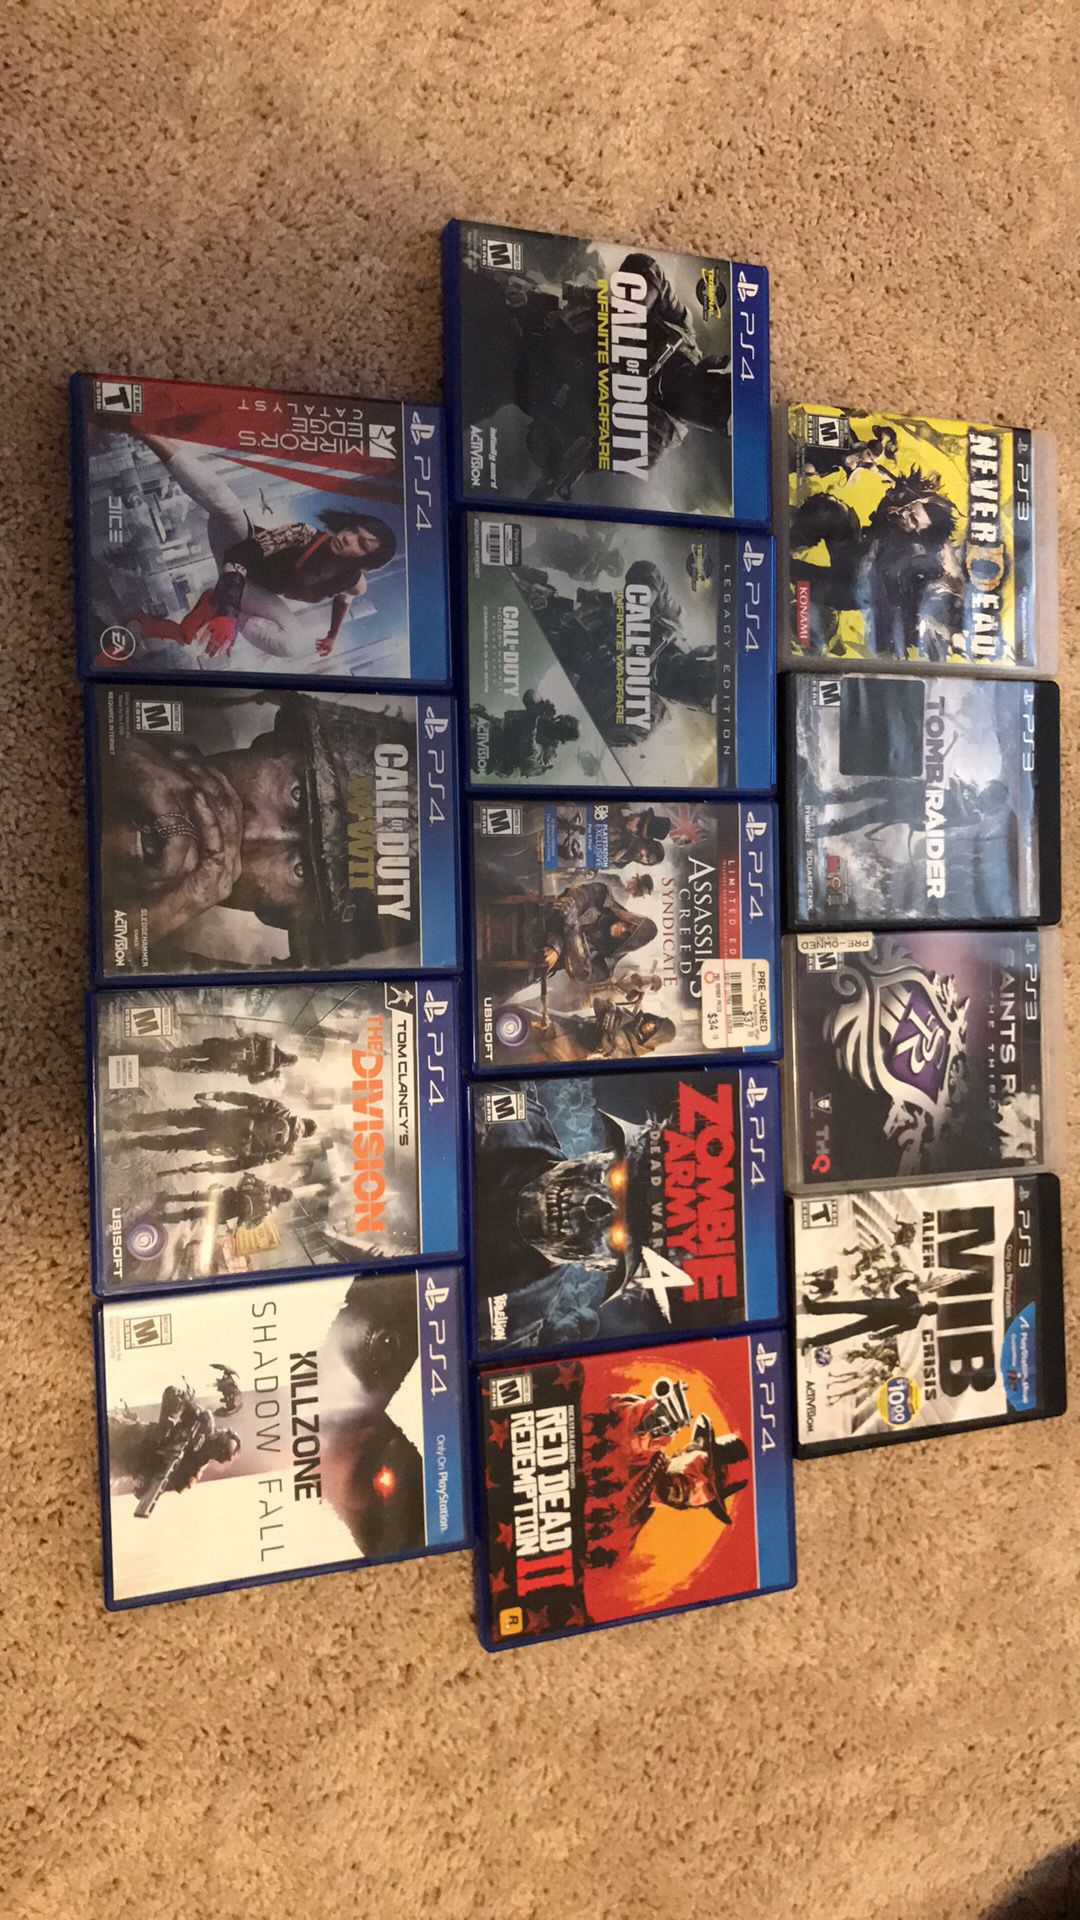 PS4 and Ps3 games